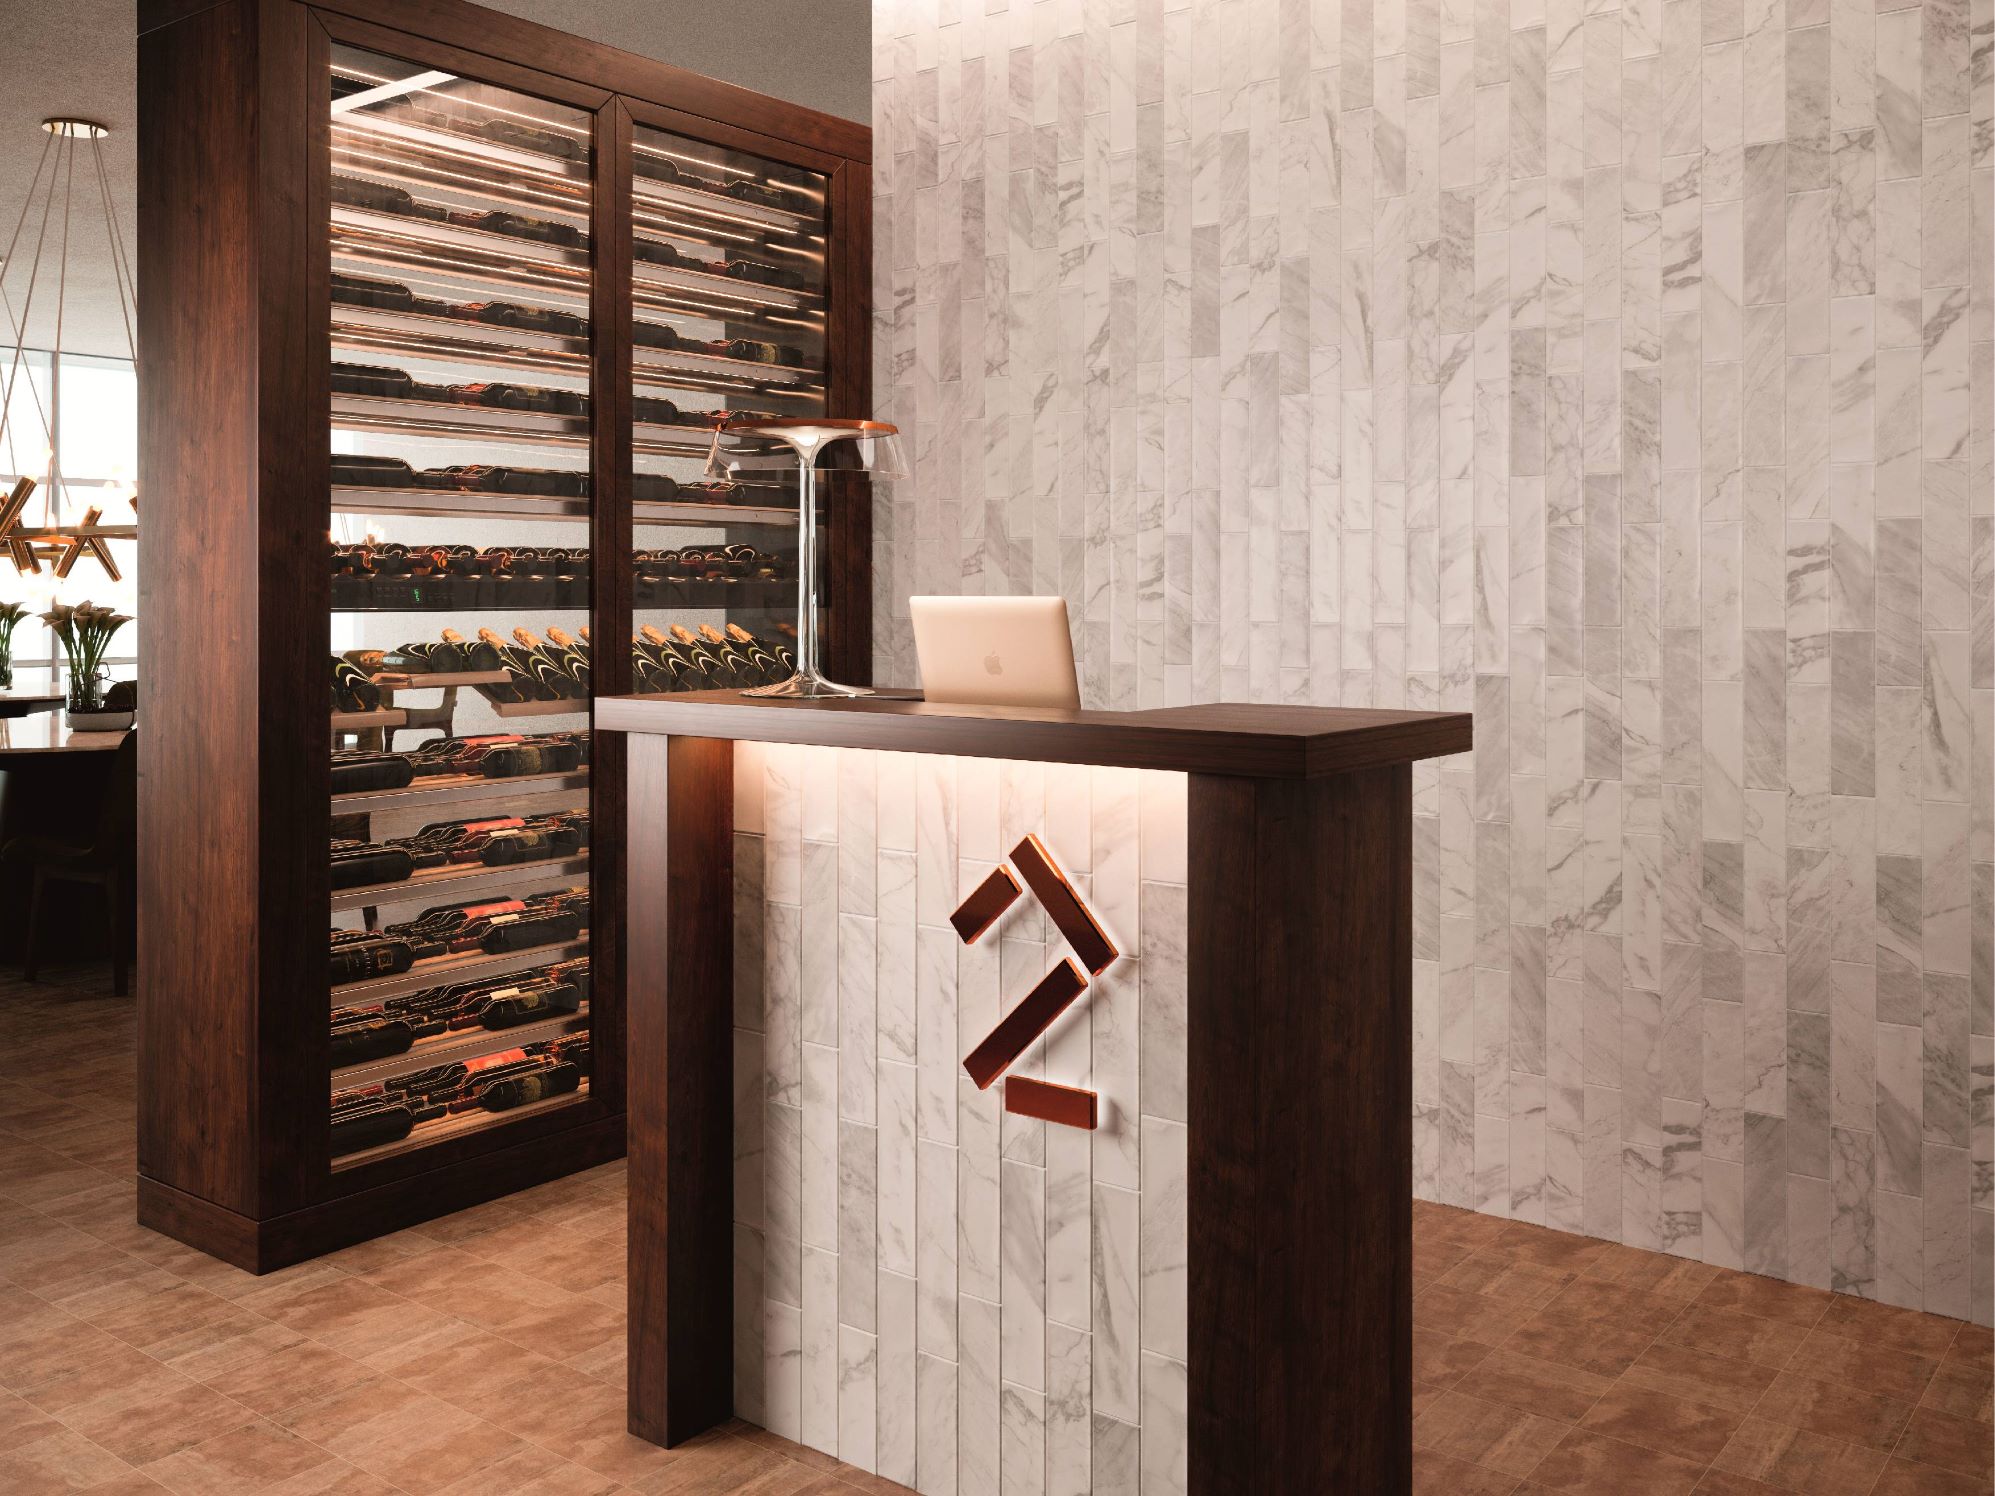 Venato_1_G | Stones & More | Finest selection of Mosaics, Glass, Tile and Stone